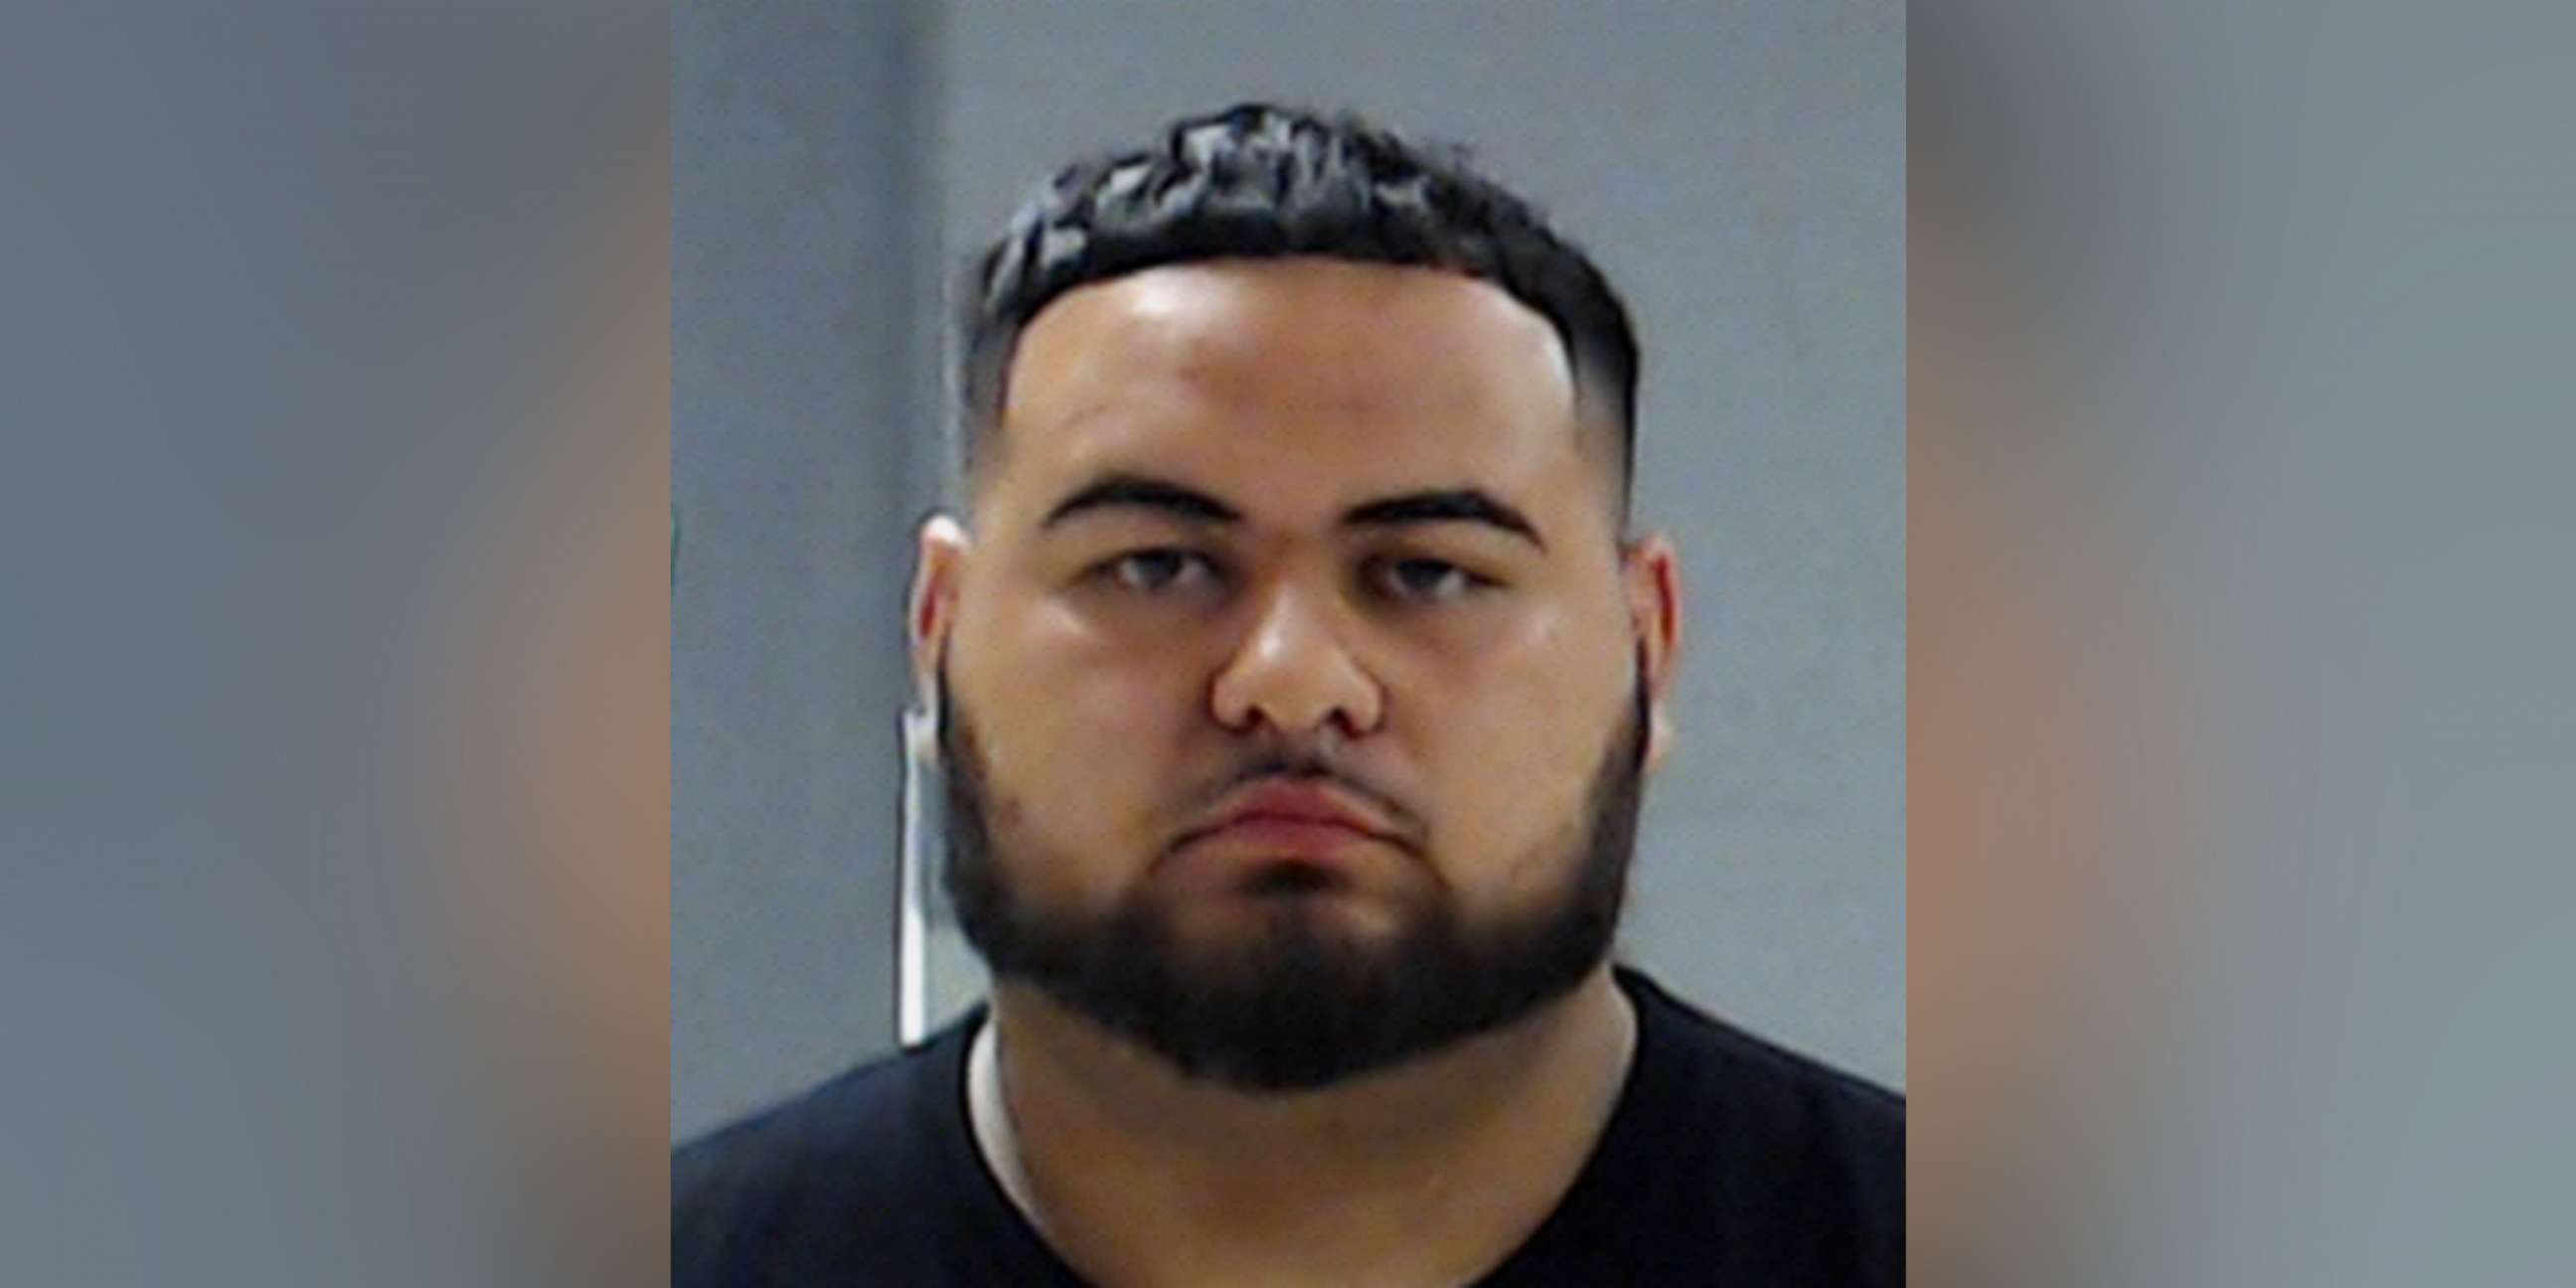 PHOTO: Brandon Ray Gonzalez, 23, is pictured in a booking photo released by the Hunt County Sheriff's Office in Texas, Oct. 28, 2019.